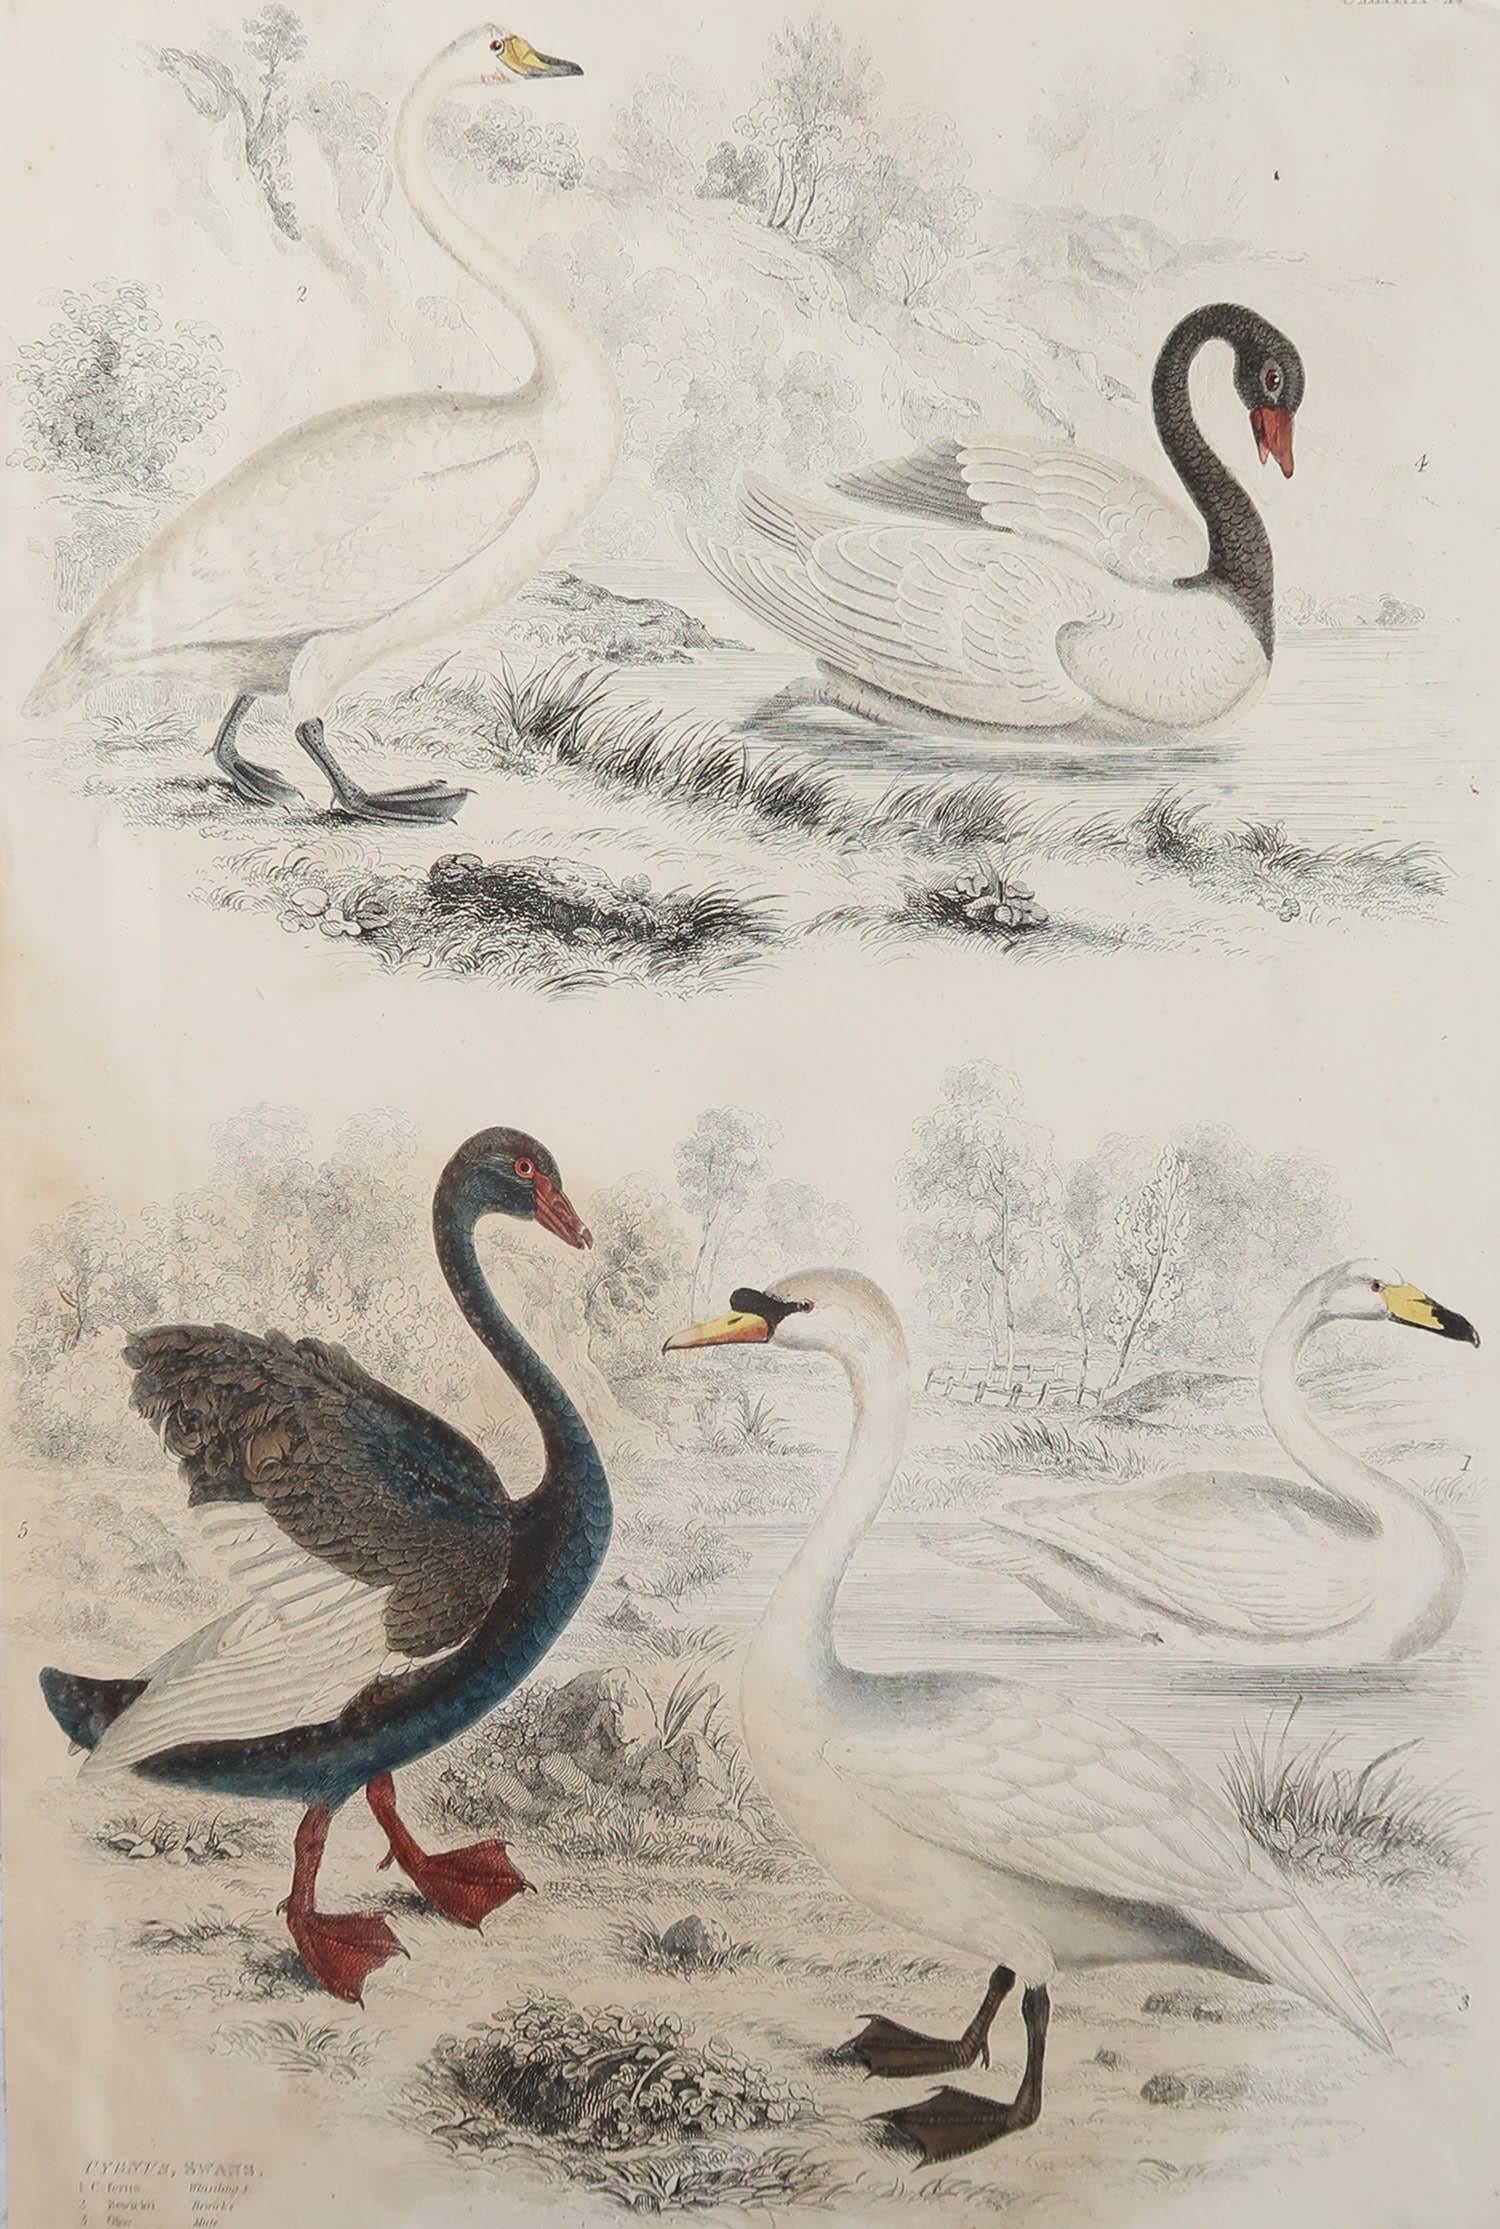 Great image of swans.

Unframed. It gives you the option of perhaps making a set up using your own choice of frames.

Lithograph after Cpt. Brown with original hand color.

Published circa 1835

Repair to a minor tear on bottom edge

Free